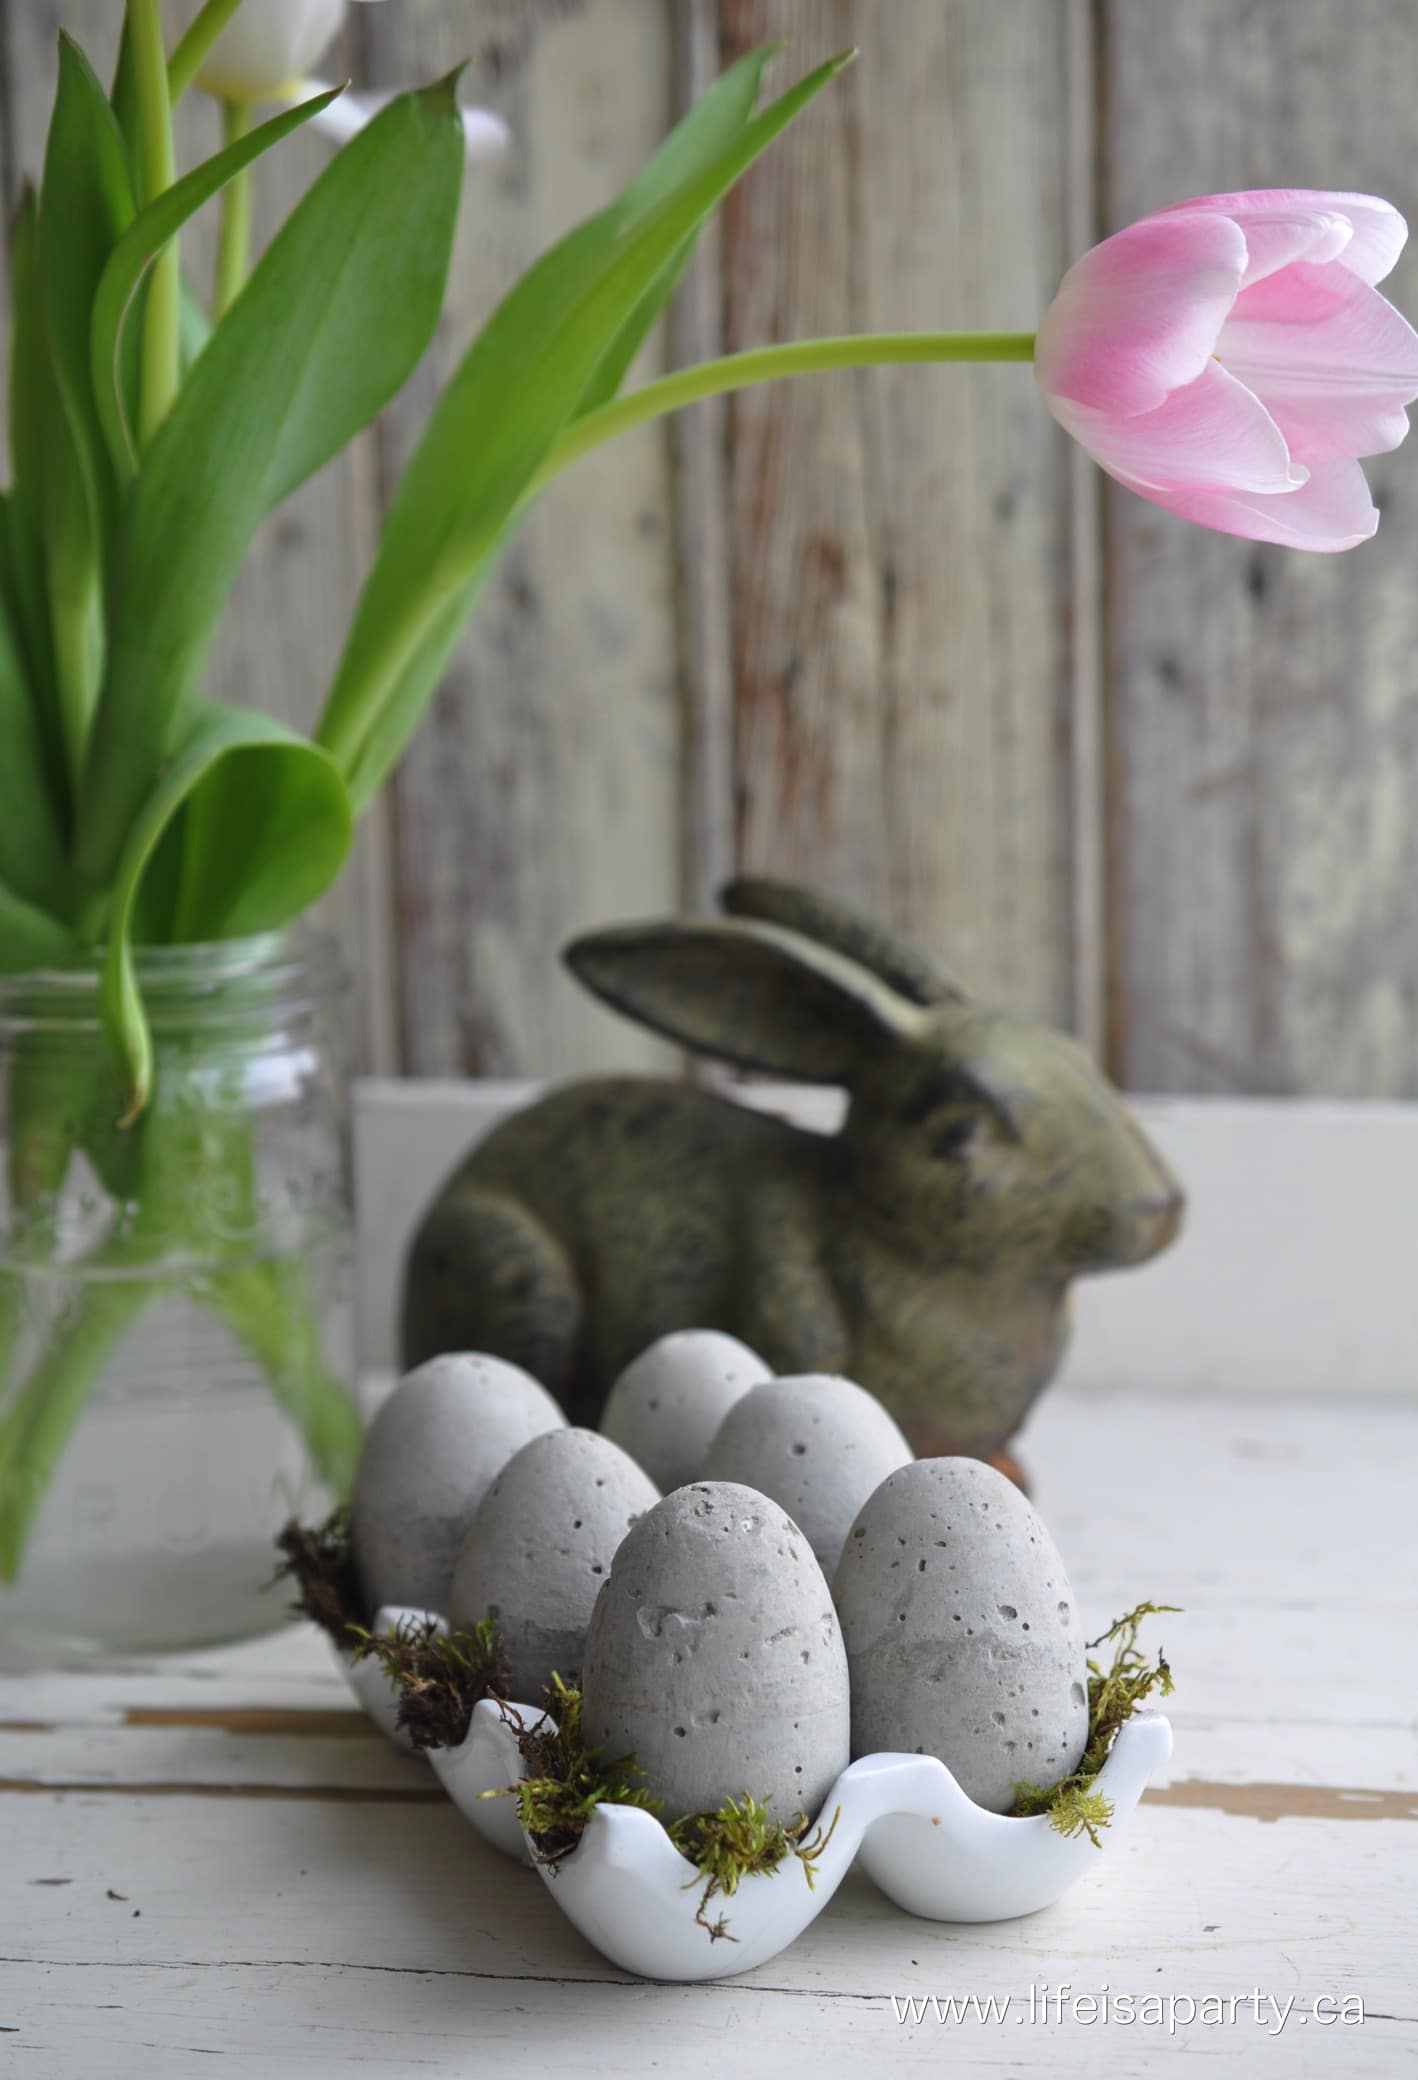 How To Make Cement Easter Eggs: See how to use plastic Easter eggs as moulds to make your own cement eggs.